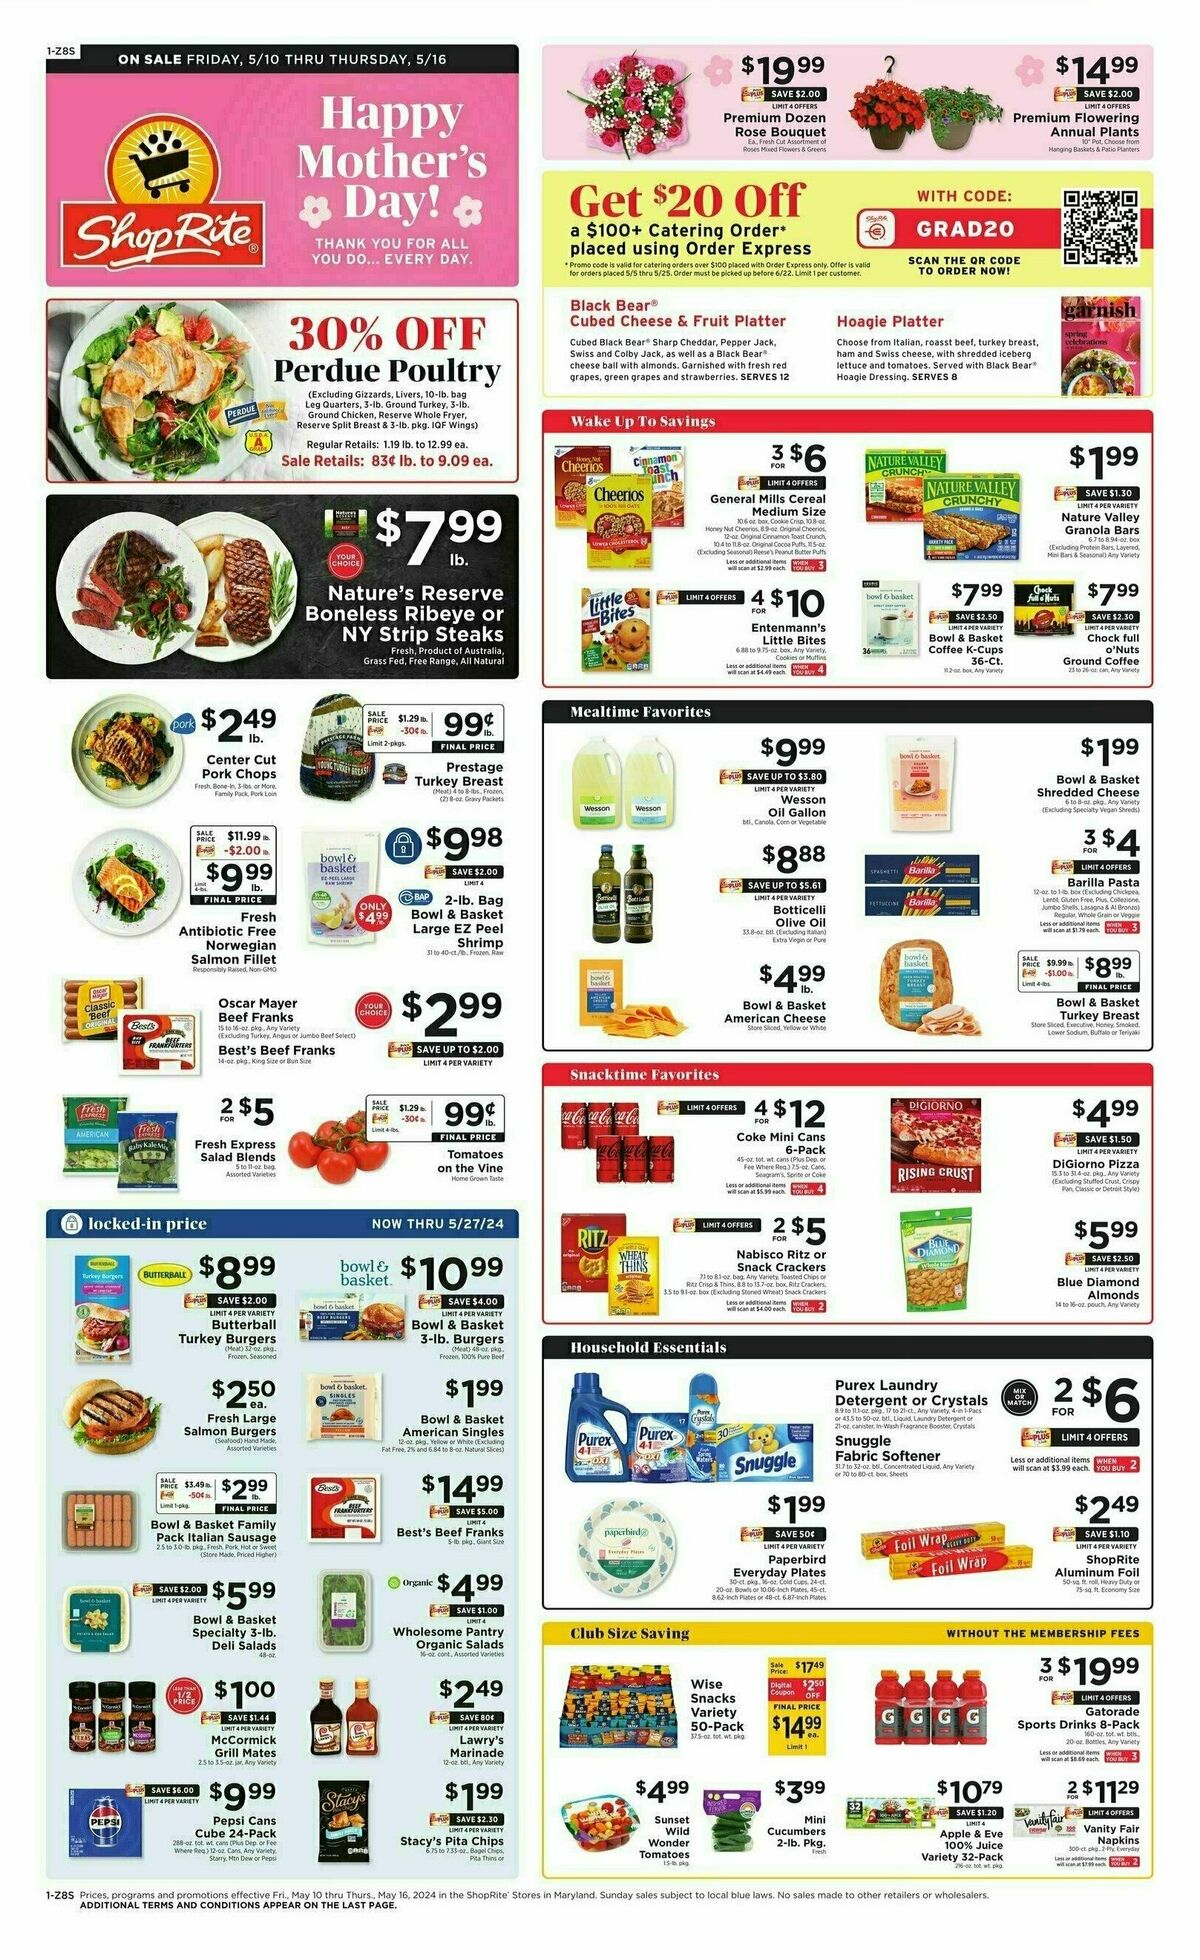 ShopRite Weekly Ad from May 10